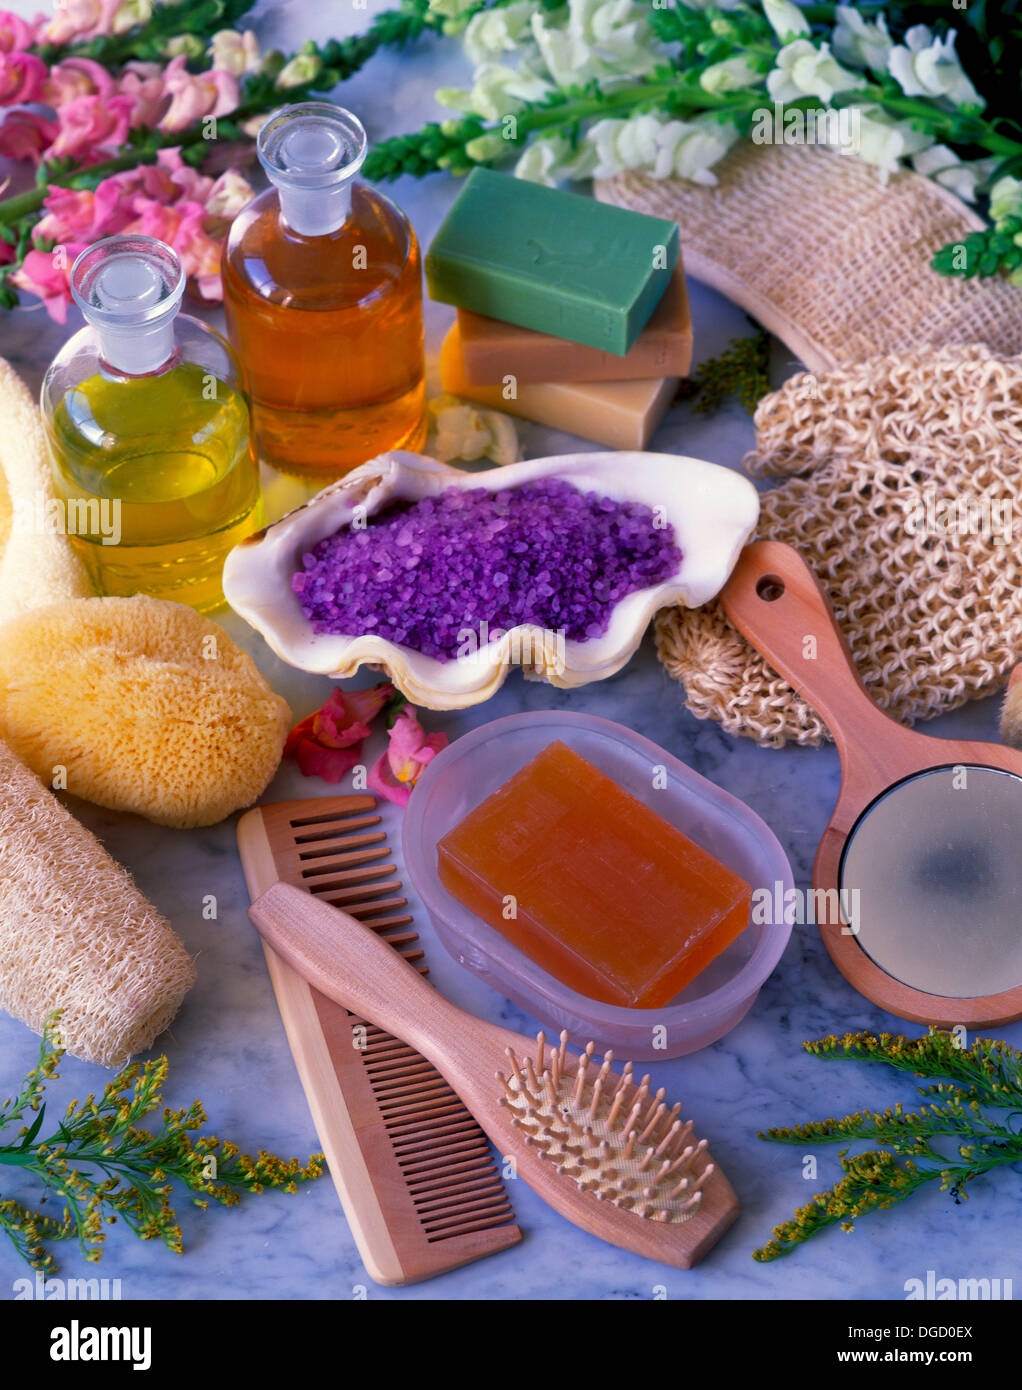 Beauty care products Stock Photo